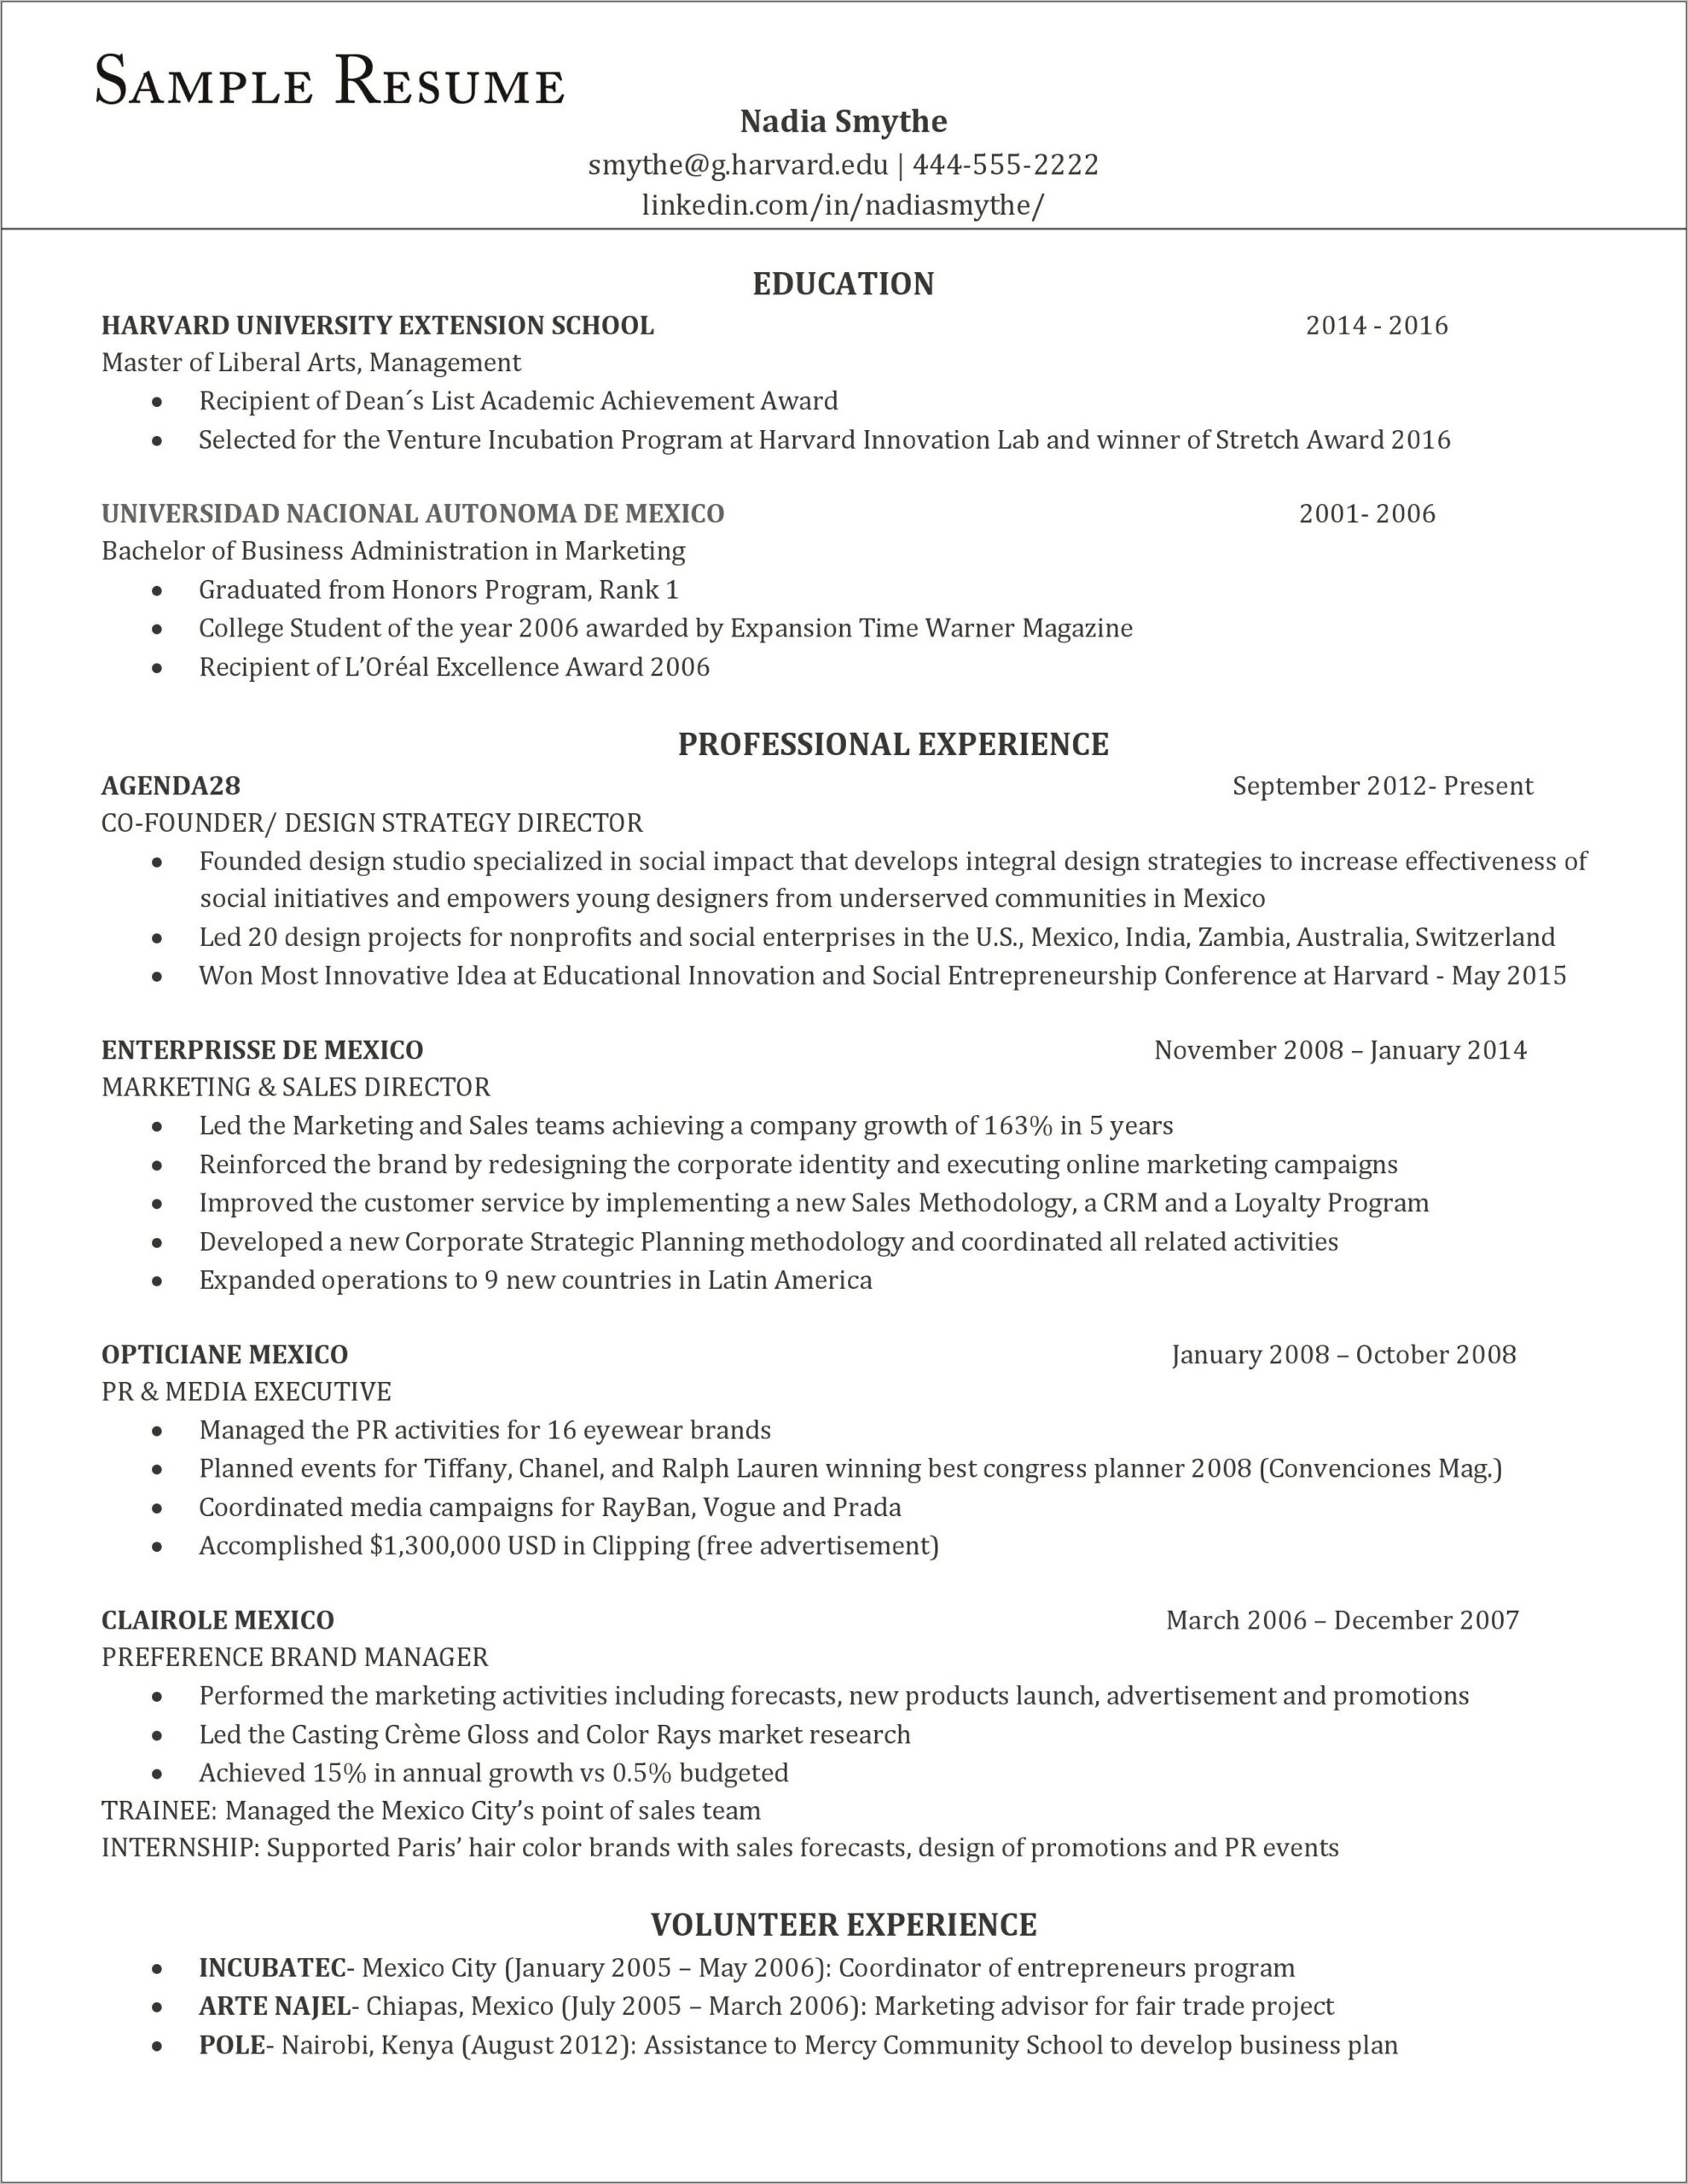 Resume Personal Projects Vs Volunteer Experience